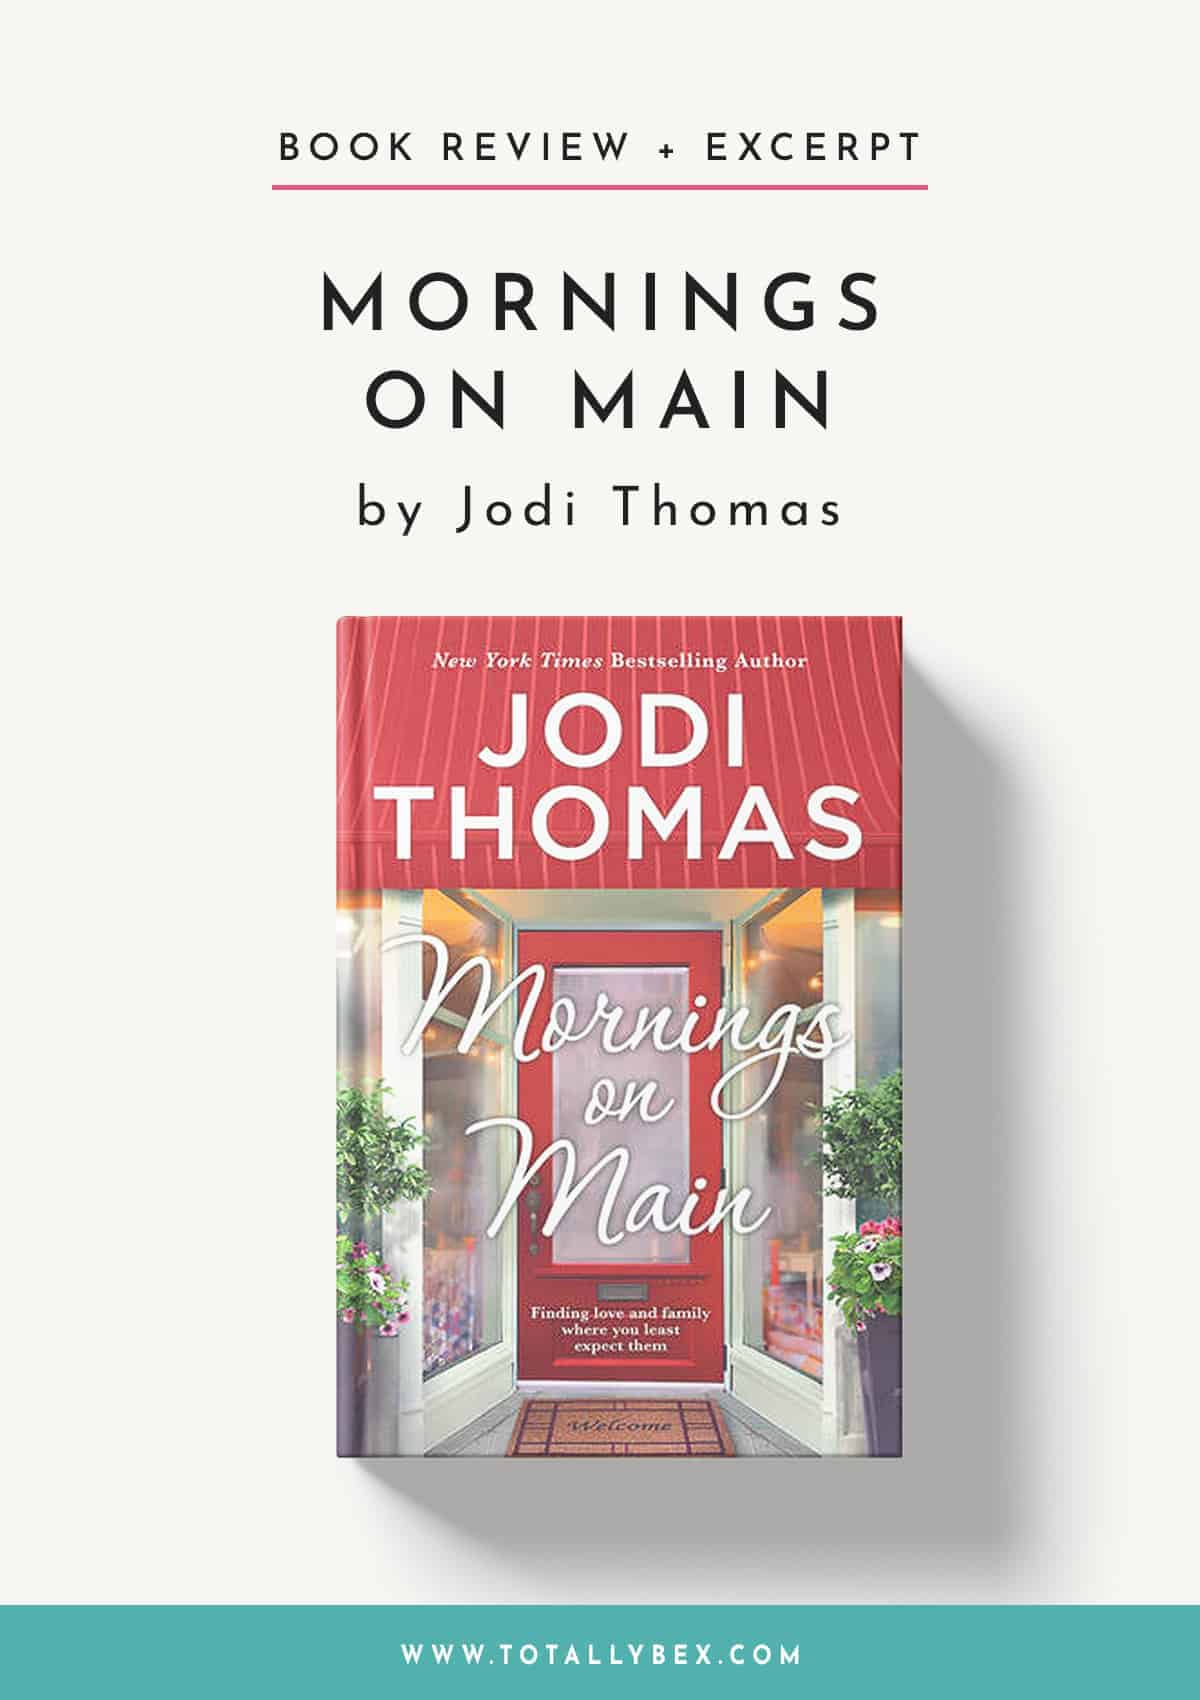 Mornings on Main by Jodi Thomas-Book Review+Excerpt